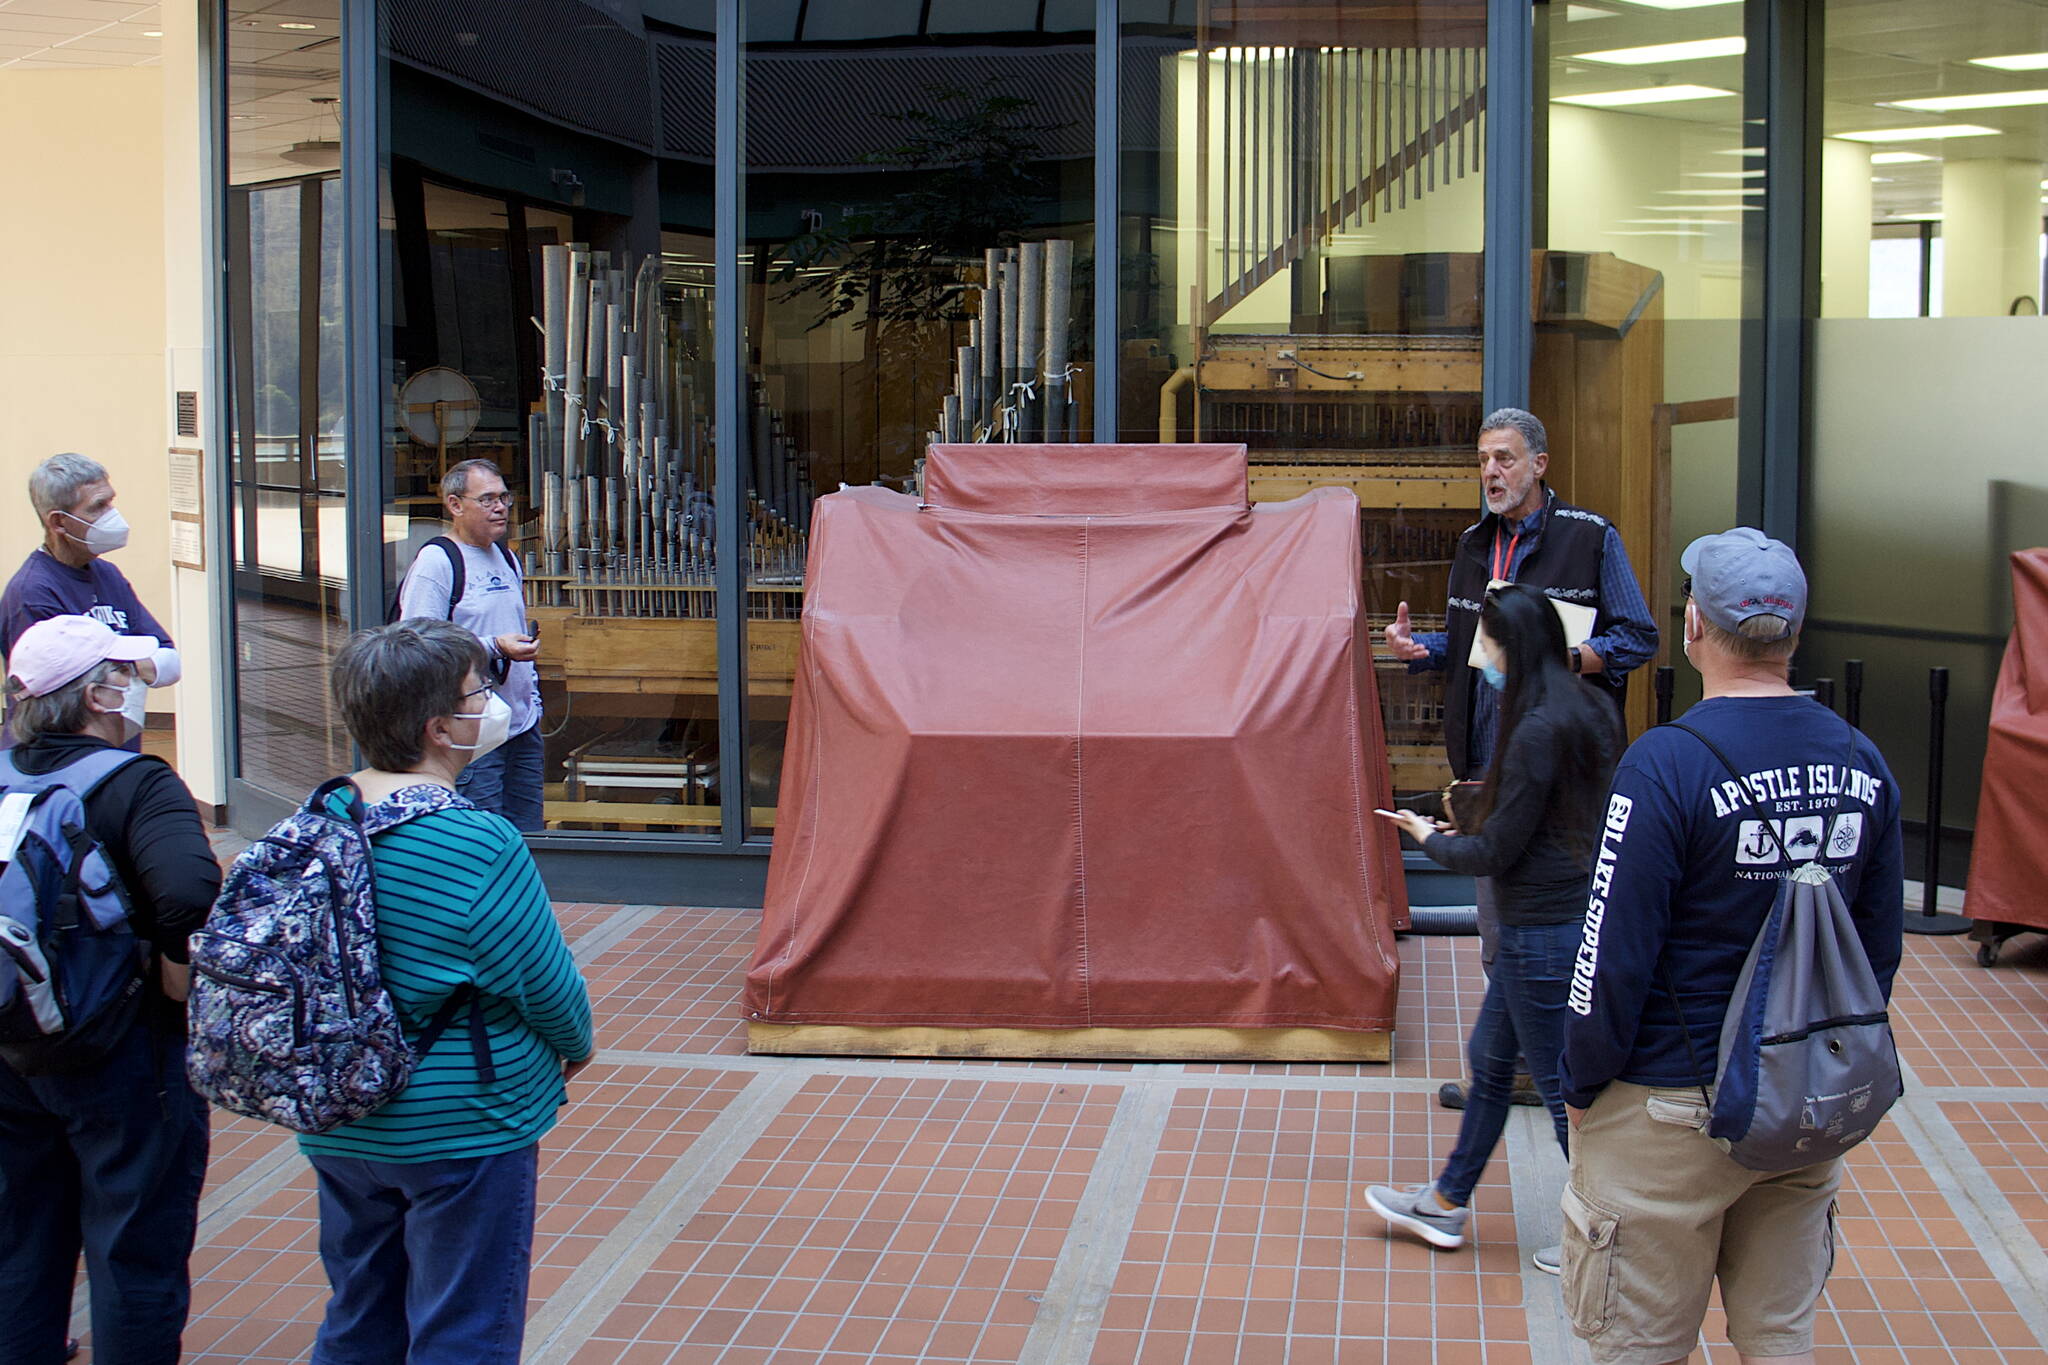 Peter Froehlich, a retired Juneau district judge who is now a volunteer tour guide, explains the history of the history of the Kimball Theatre Pipe Organ in the State Office Building to a group of visitors Thursday. The organ has been idle since 2020 due to the COVID-19 pandemic, and now needs repairs before regular Friday lunchtime concerts and other performances on the 94-year-old instrument can resume. (Mark Sabbatini / Juneau Empire)